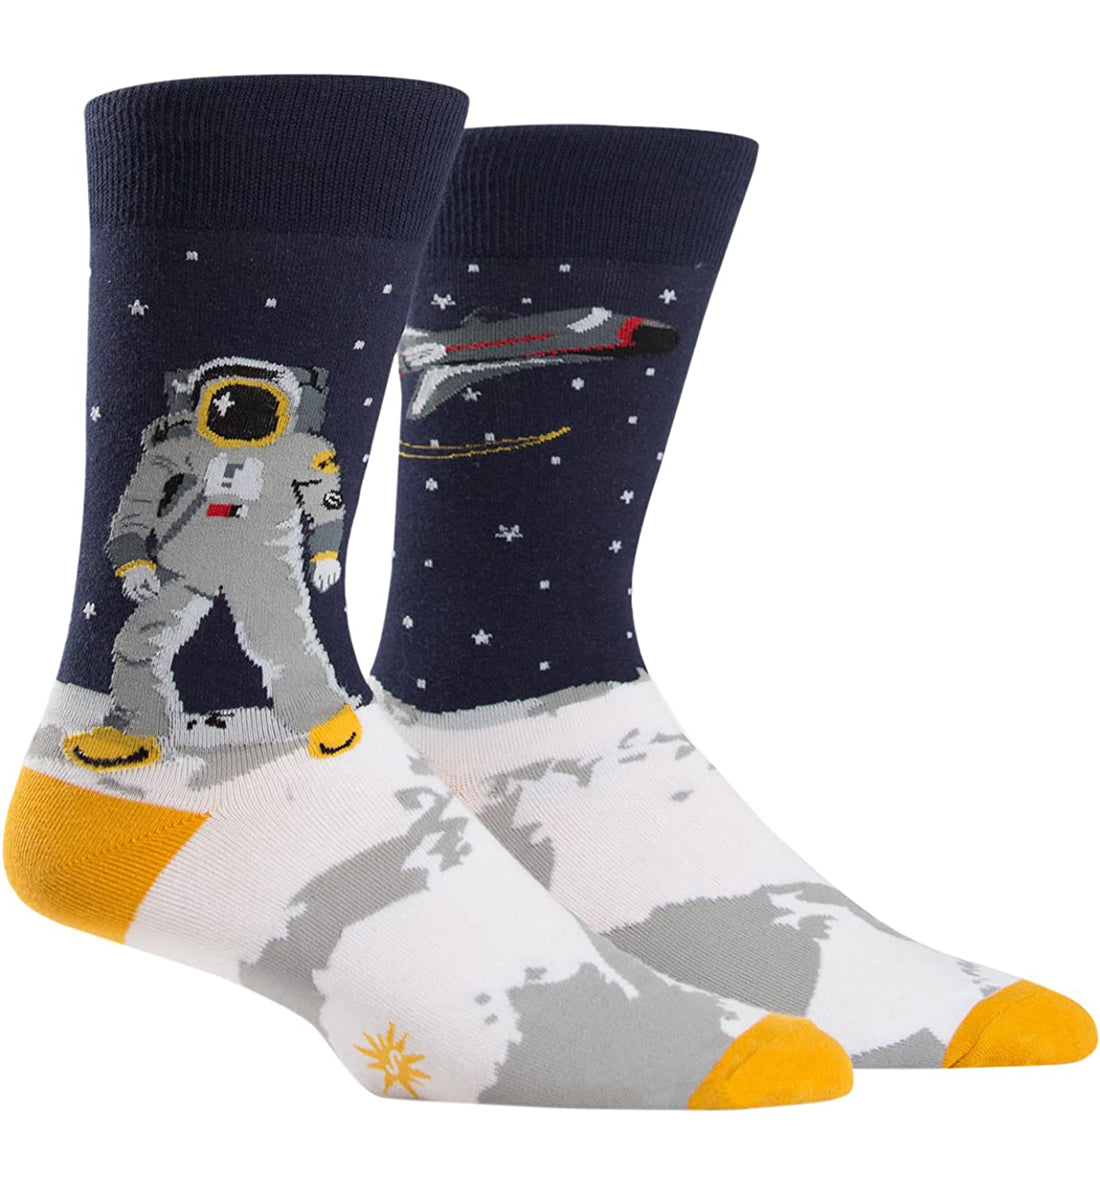 SOCK it to me Men&#39;s Crew Socks (mef0114),One Giant Leap - One Giant Leap,One Size